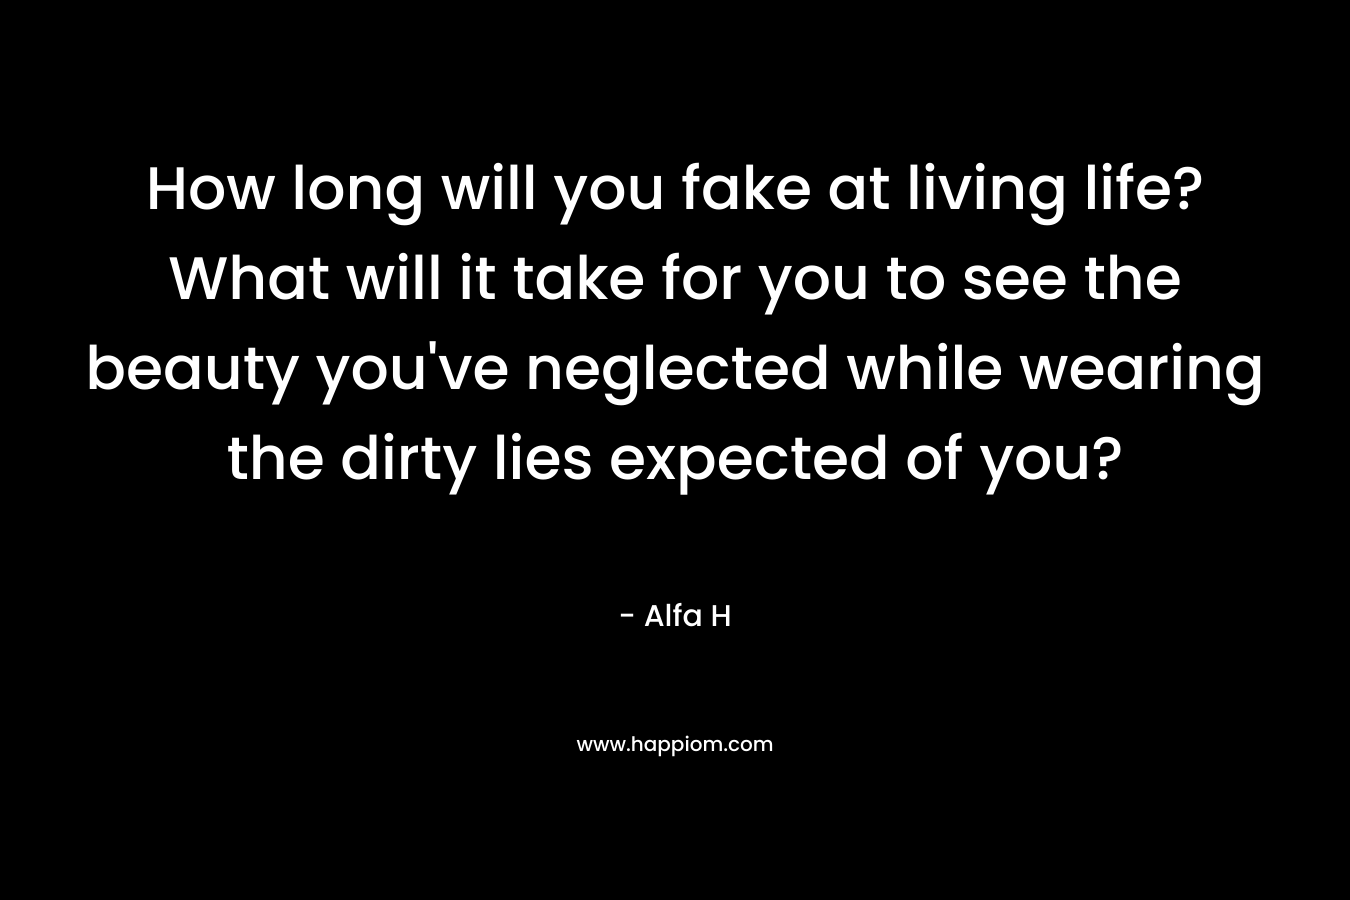 How long will you fake at living life? What will it take for you to see the beauty you've neglected while wearing the dirty lies expected of you?